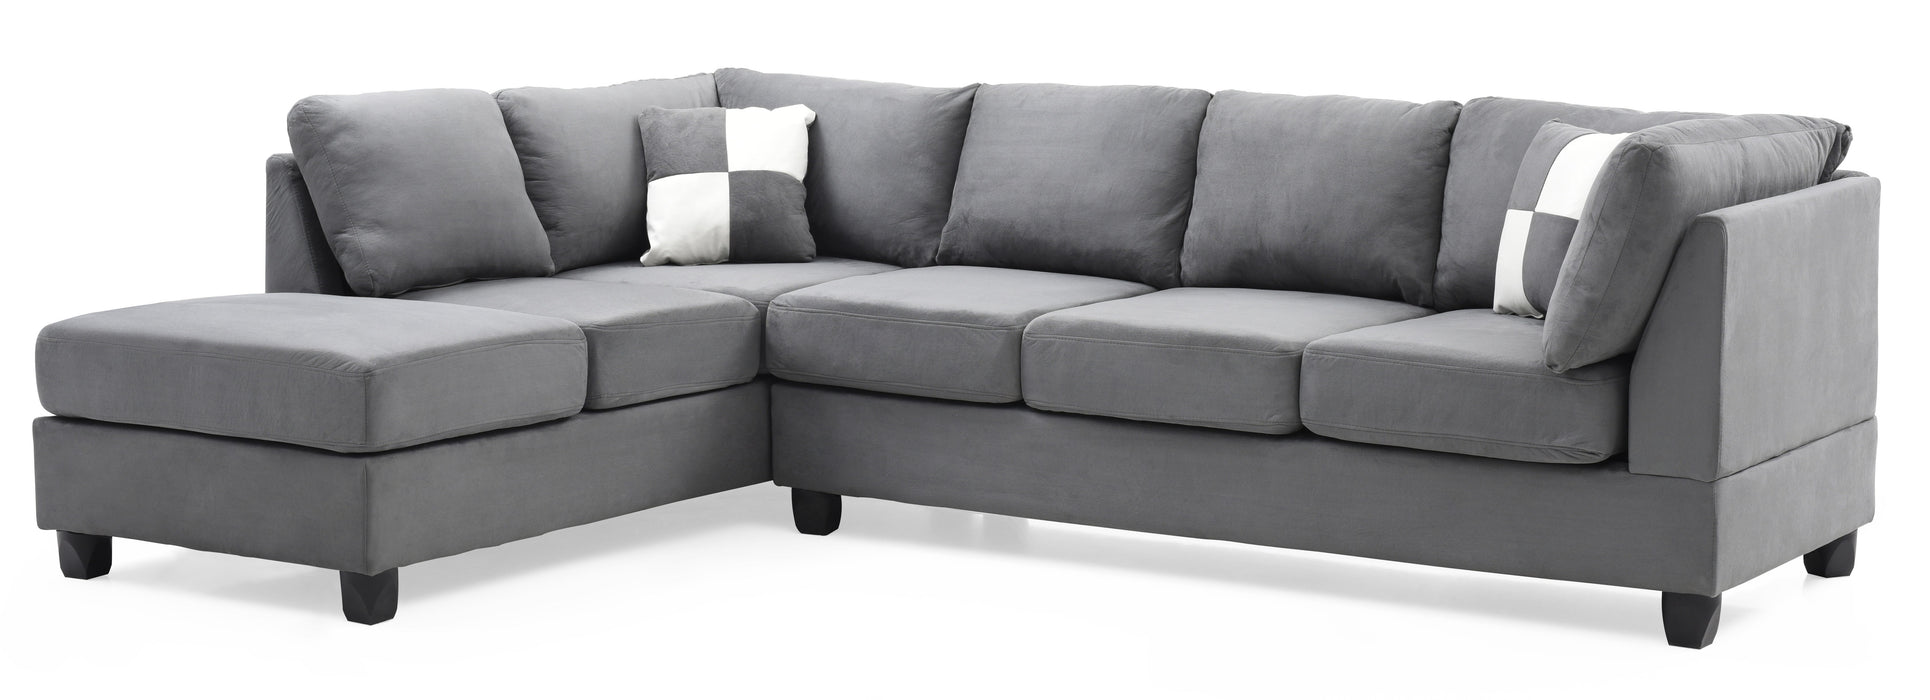 Glory Furniture Malone Sectional (3 Boxes), Gray - Microfiber